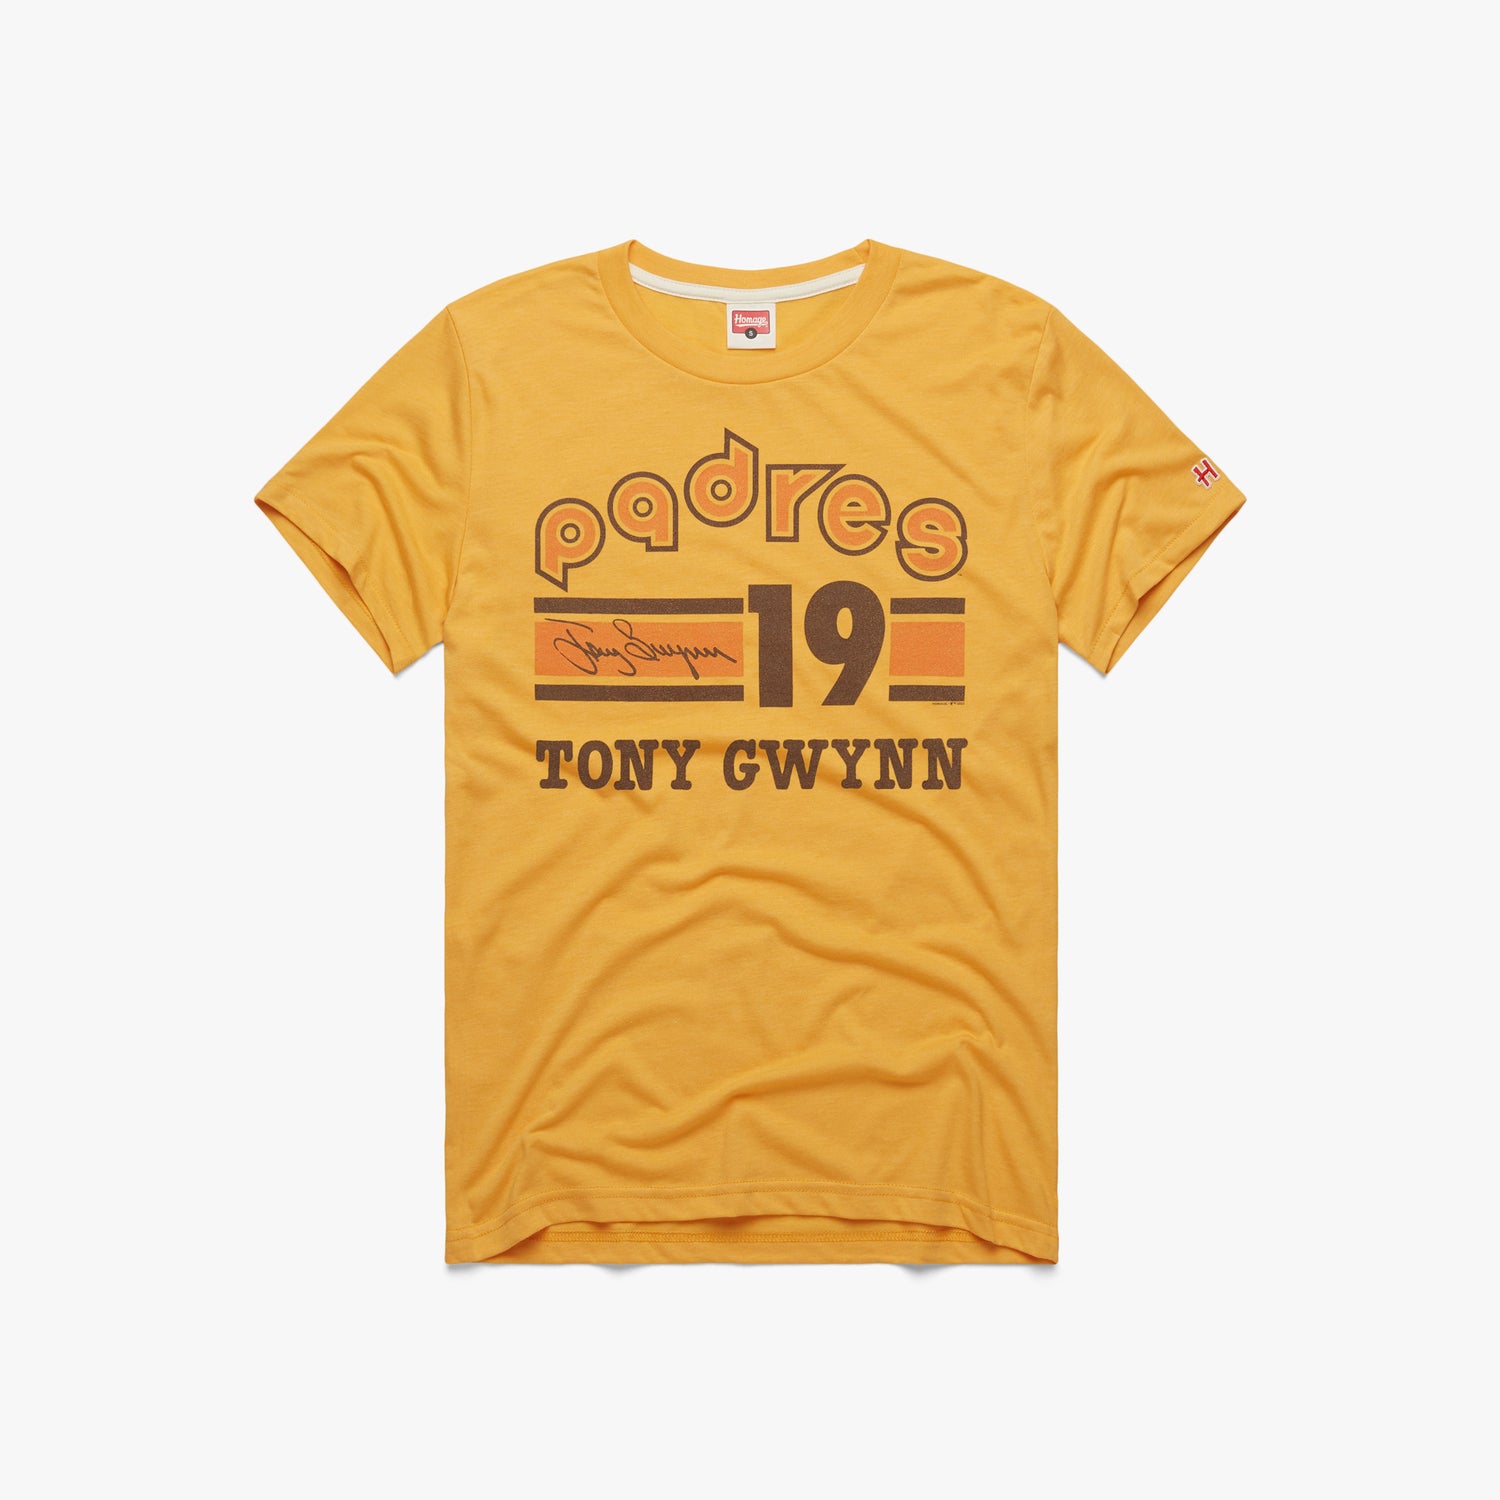 Padres Tony Gwynn Signature Jersey T-Shirt from Homage. | Gold | Vintage Apparel from Homage.